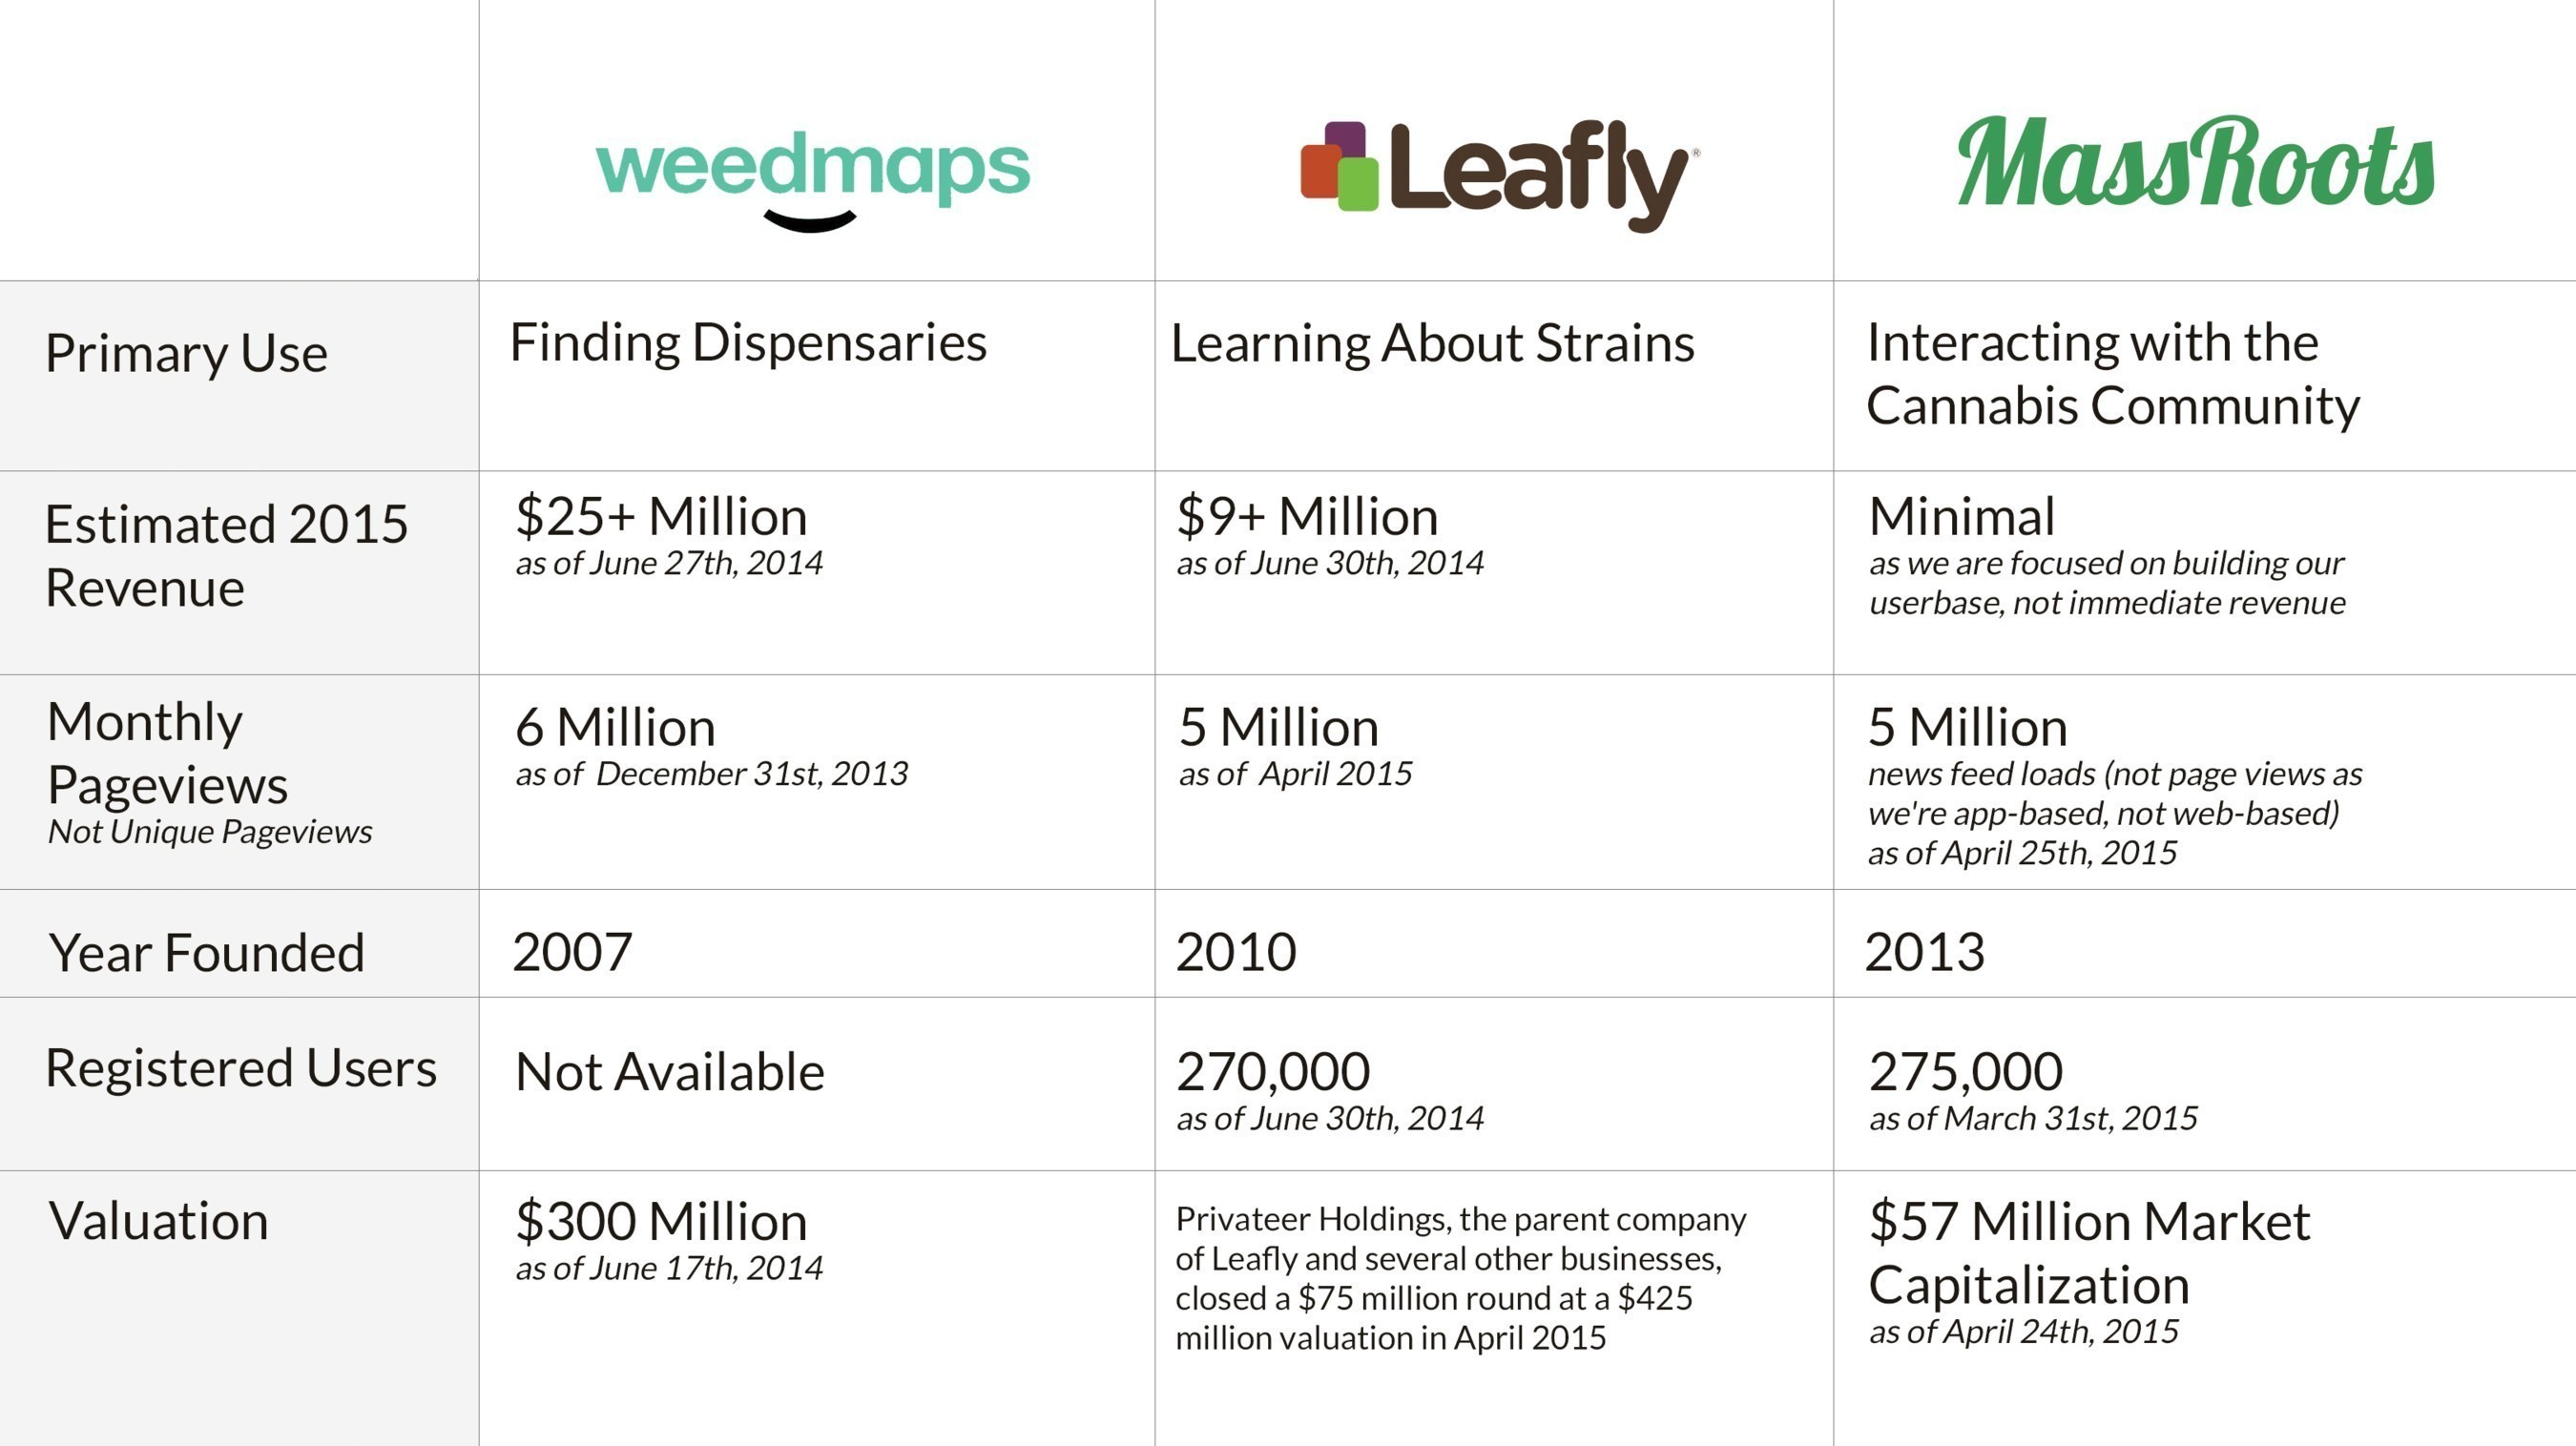 MassRoots' closest competitors are Leafly and WeedMaps, a strain resource guide and dispensary locator, respectfully.